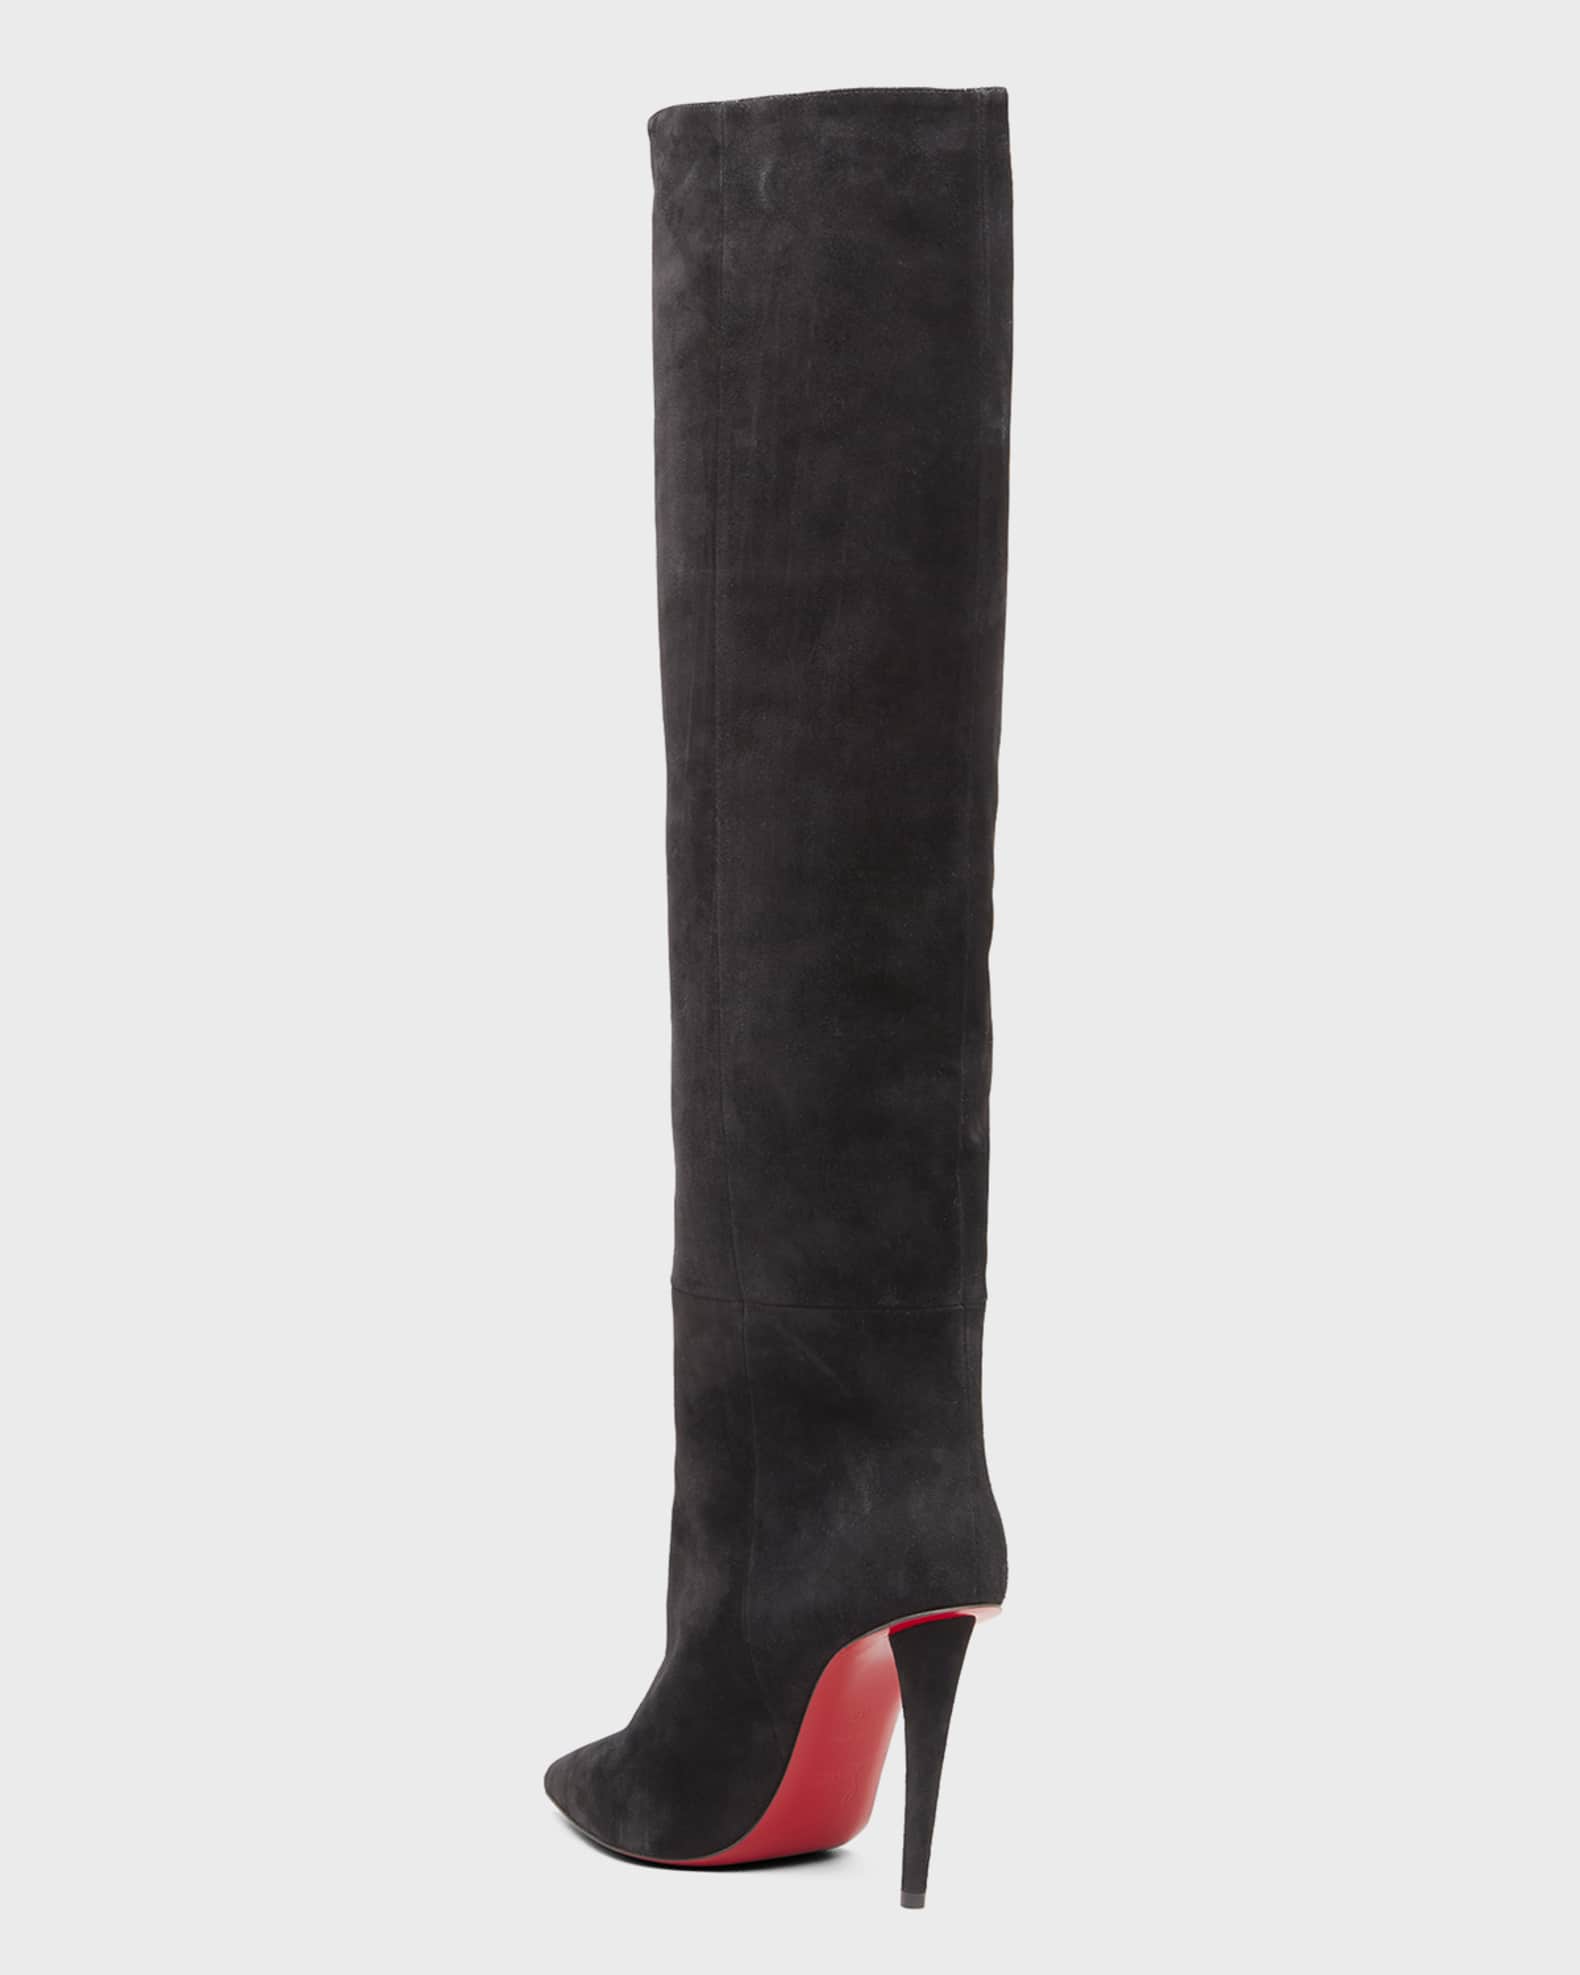 ubehagelig hat det sidste Christian Louboutin Suede Red Sole Over-The-Knee Boots | Neiman Marcus